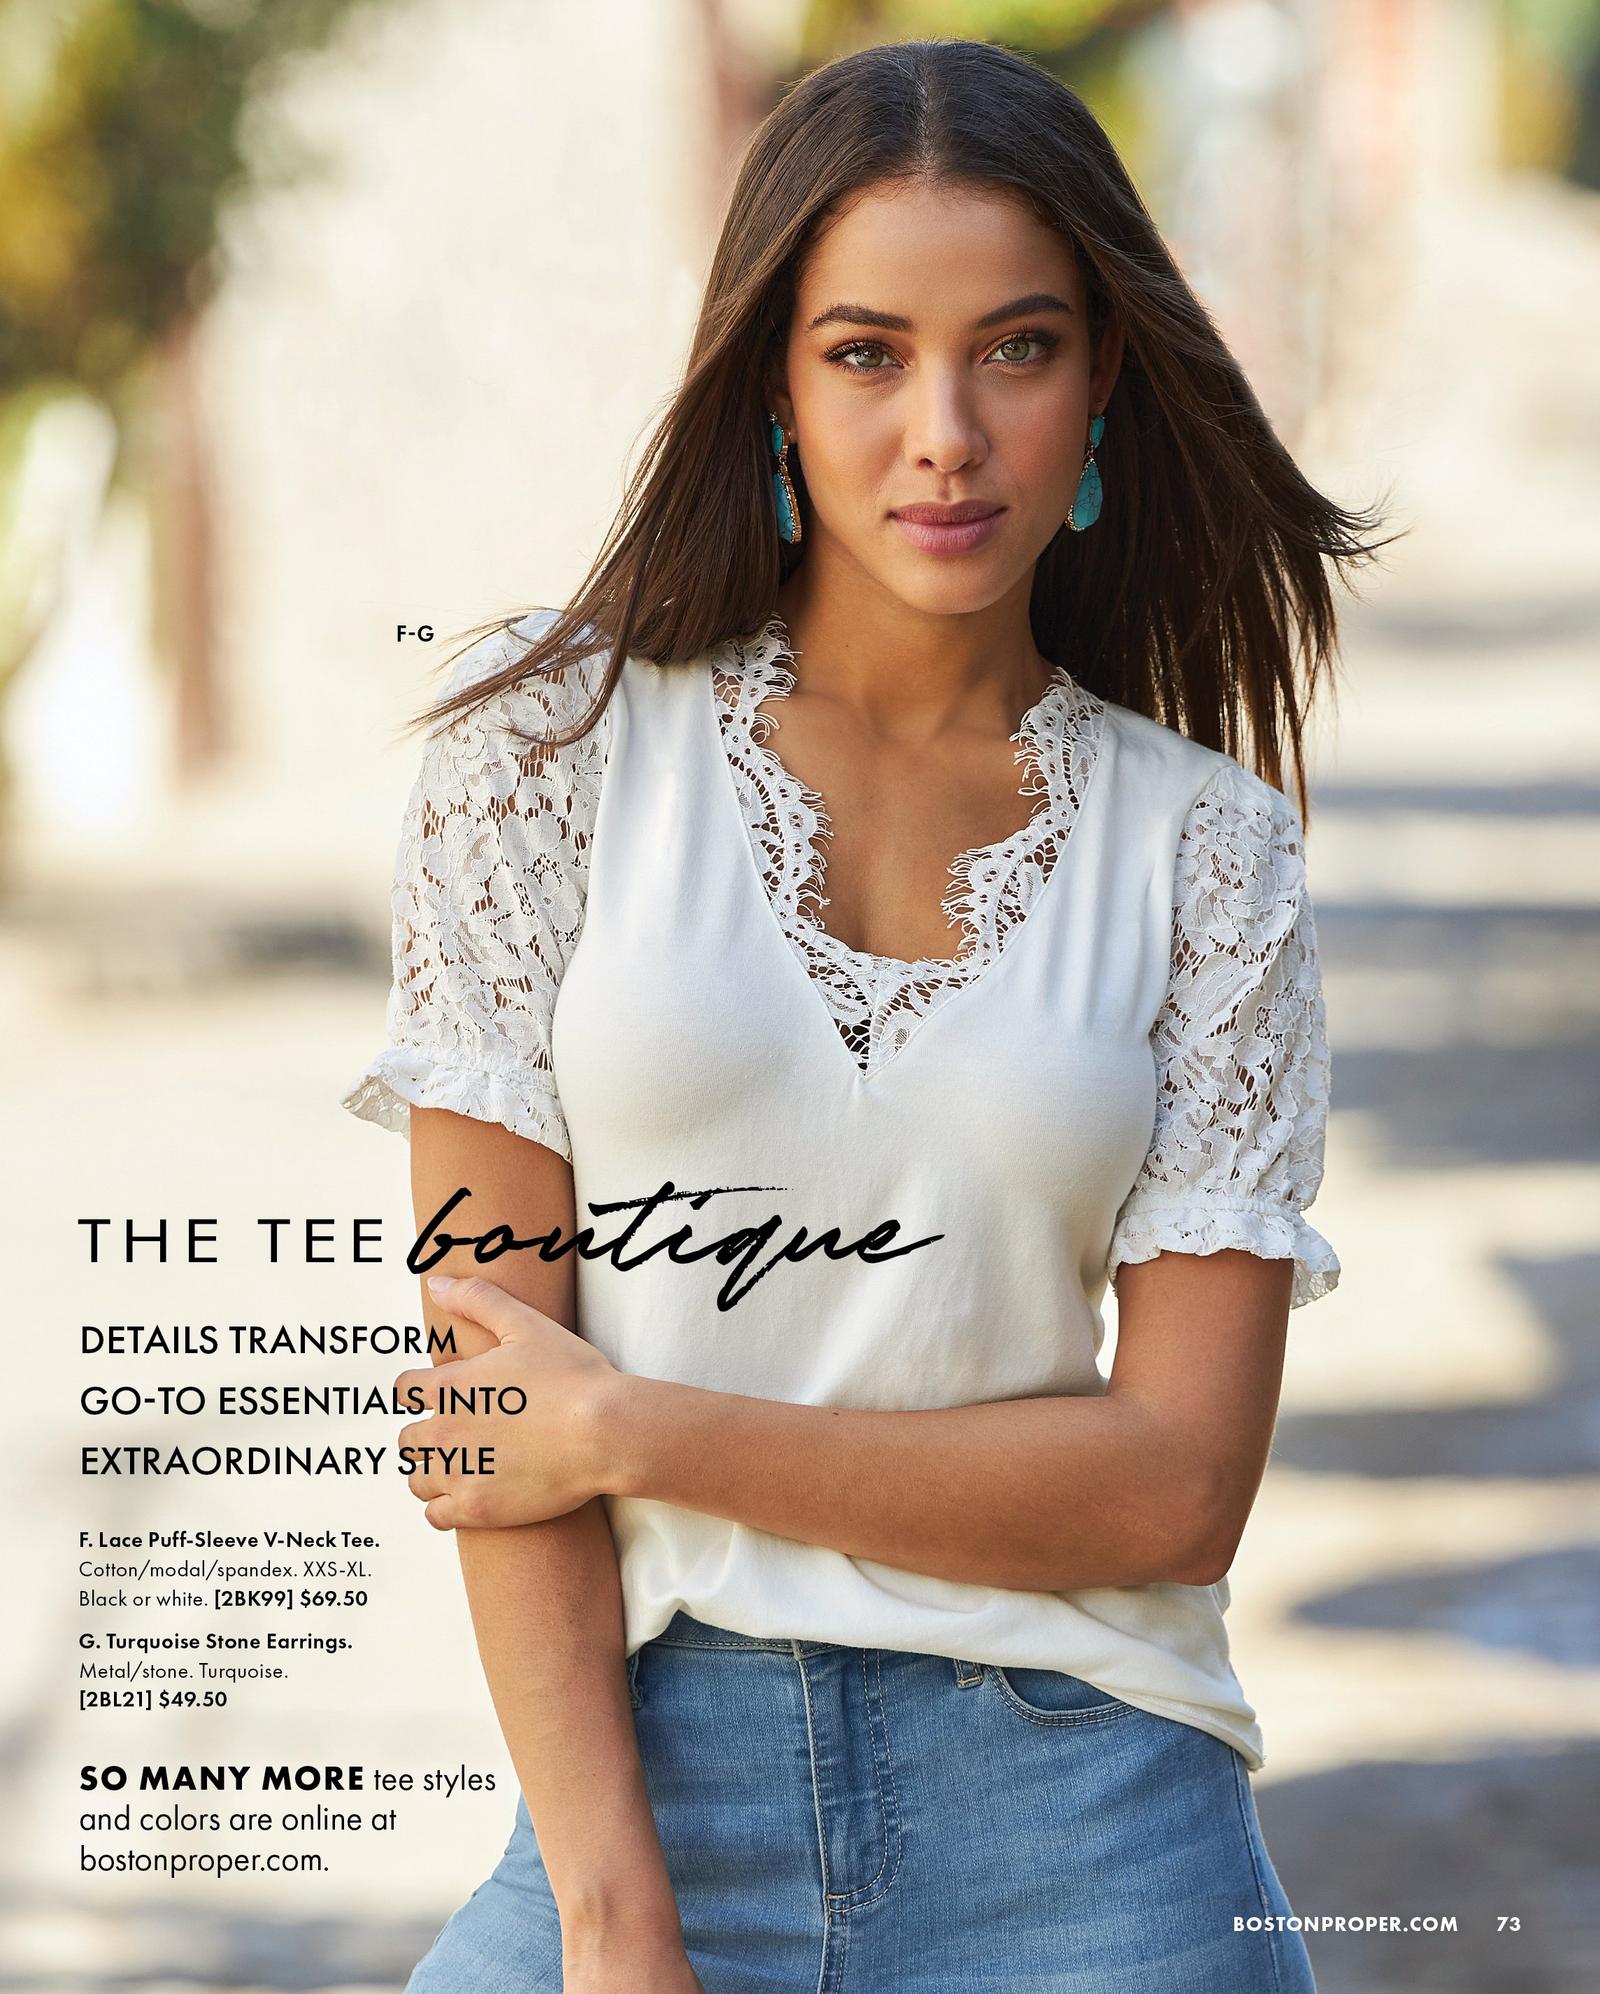 model wearing a white lace puff-sleeve v-neck tee, turquoise stone earrings, and light wash jeans.